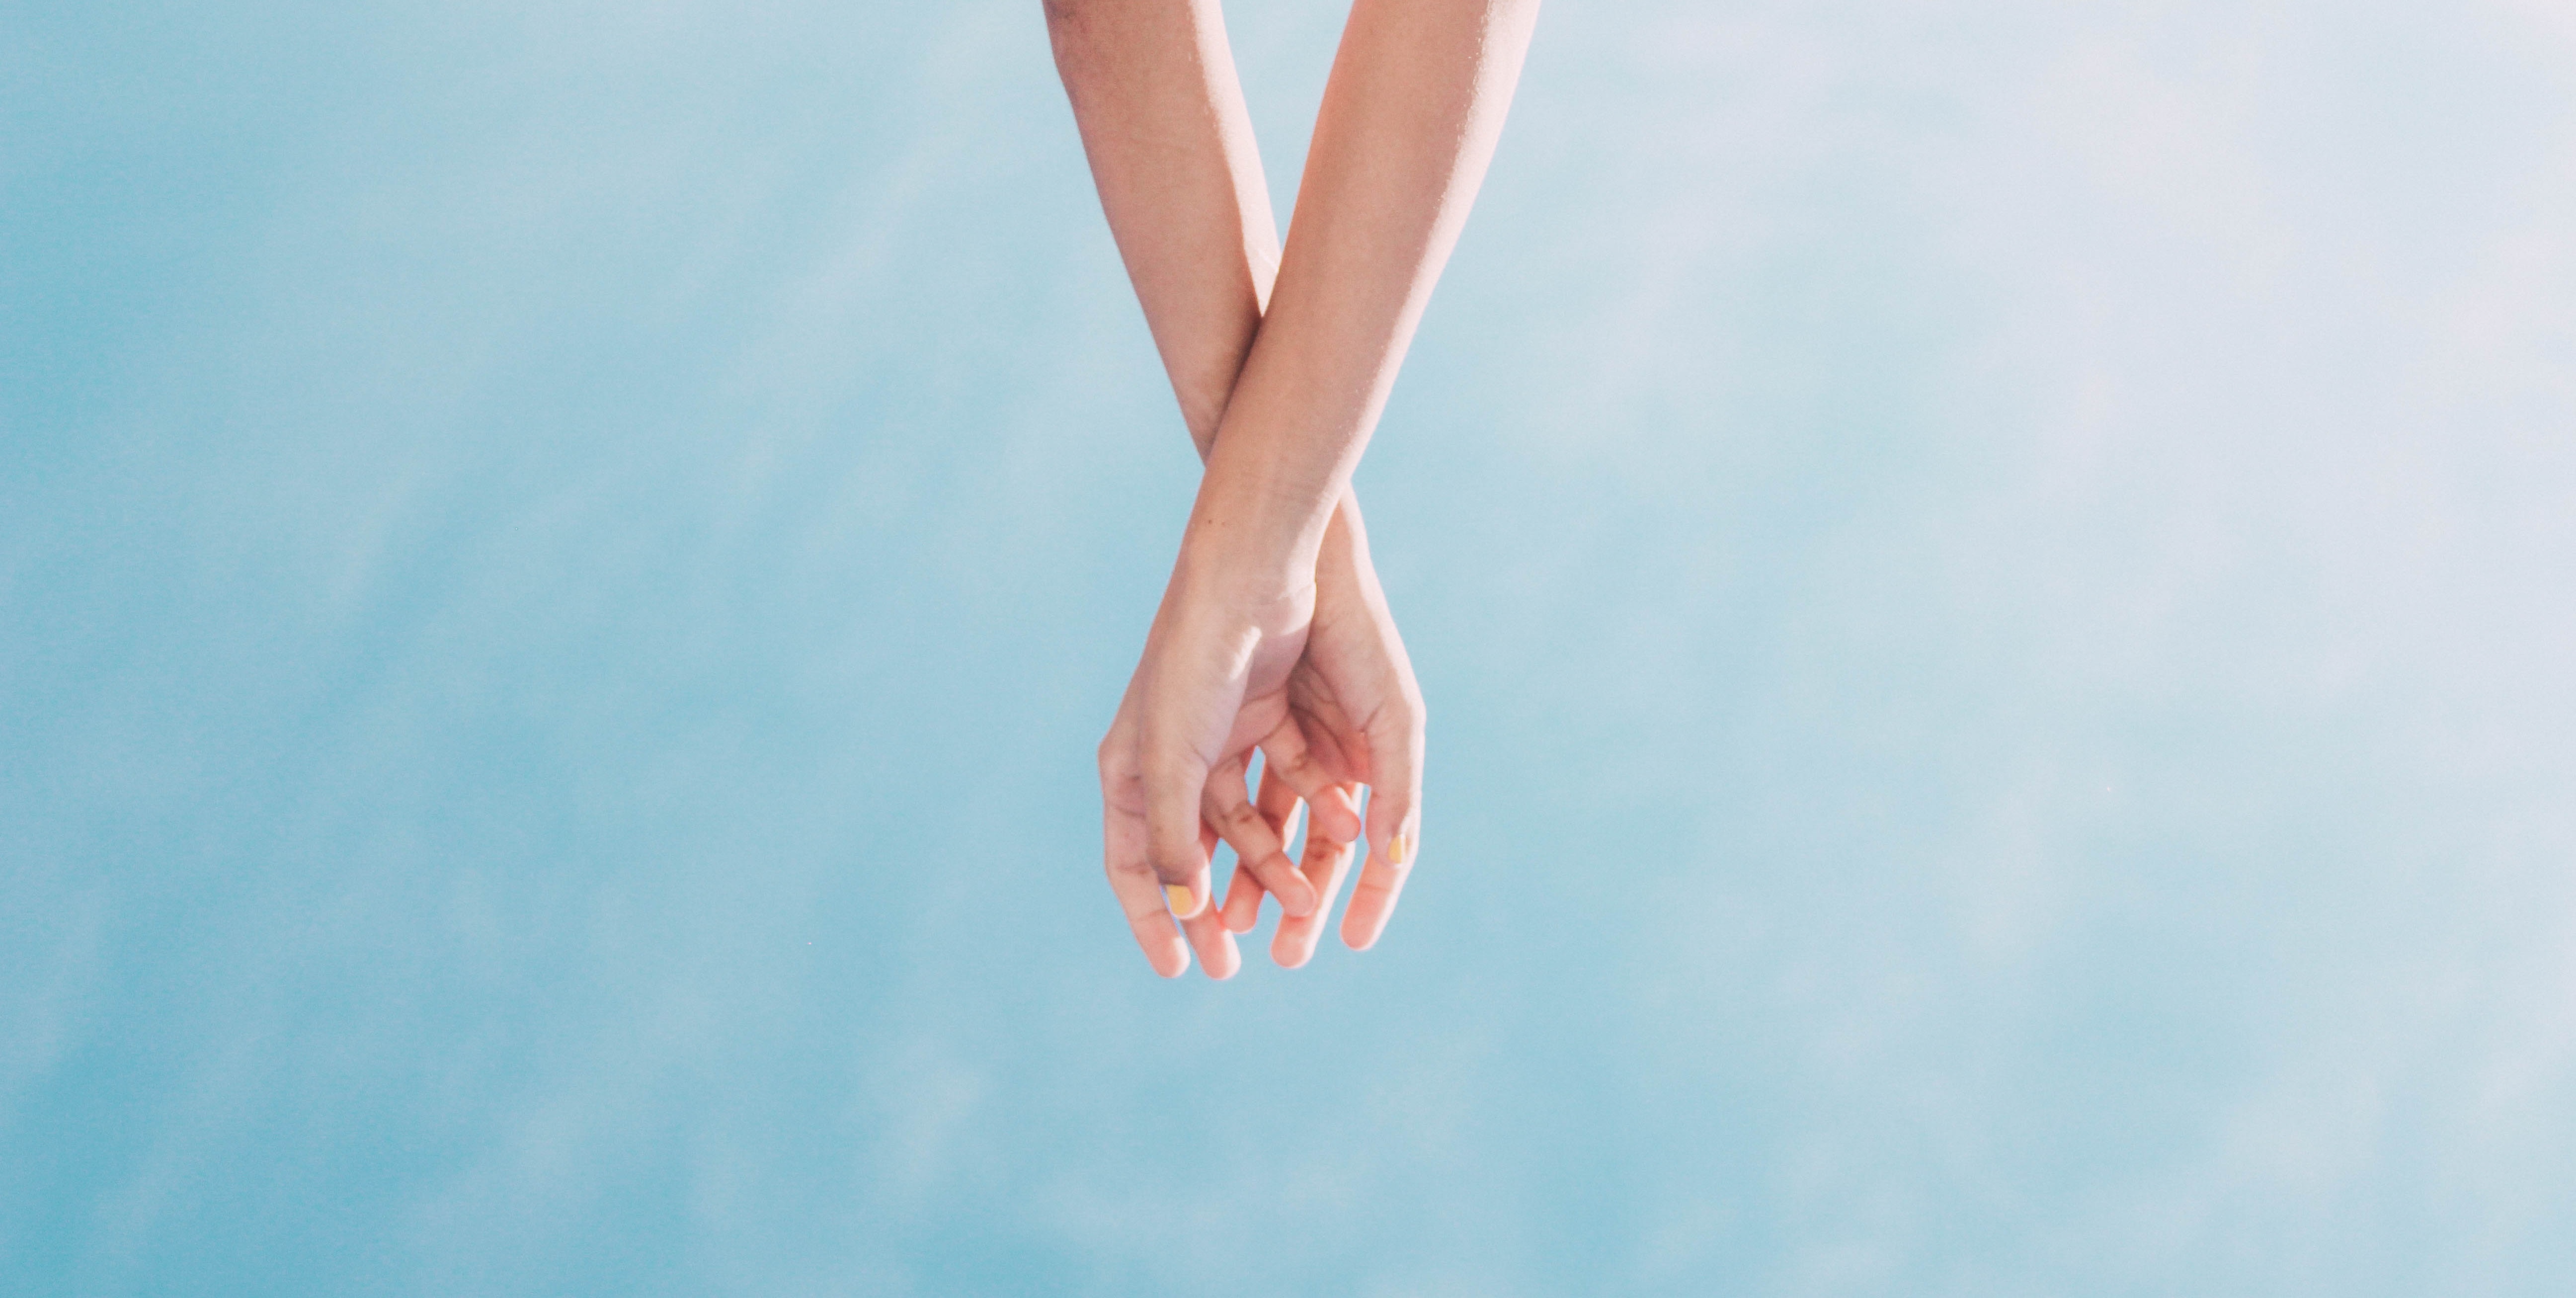 touch, sky, miscellanea, miscellaneous, hands, touching, ease